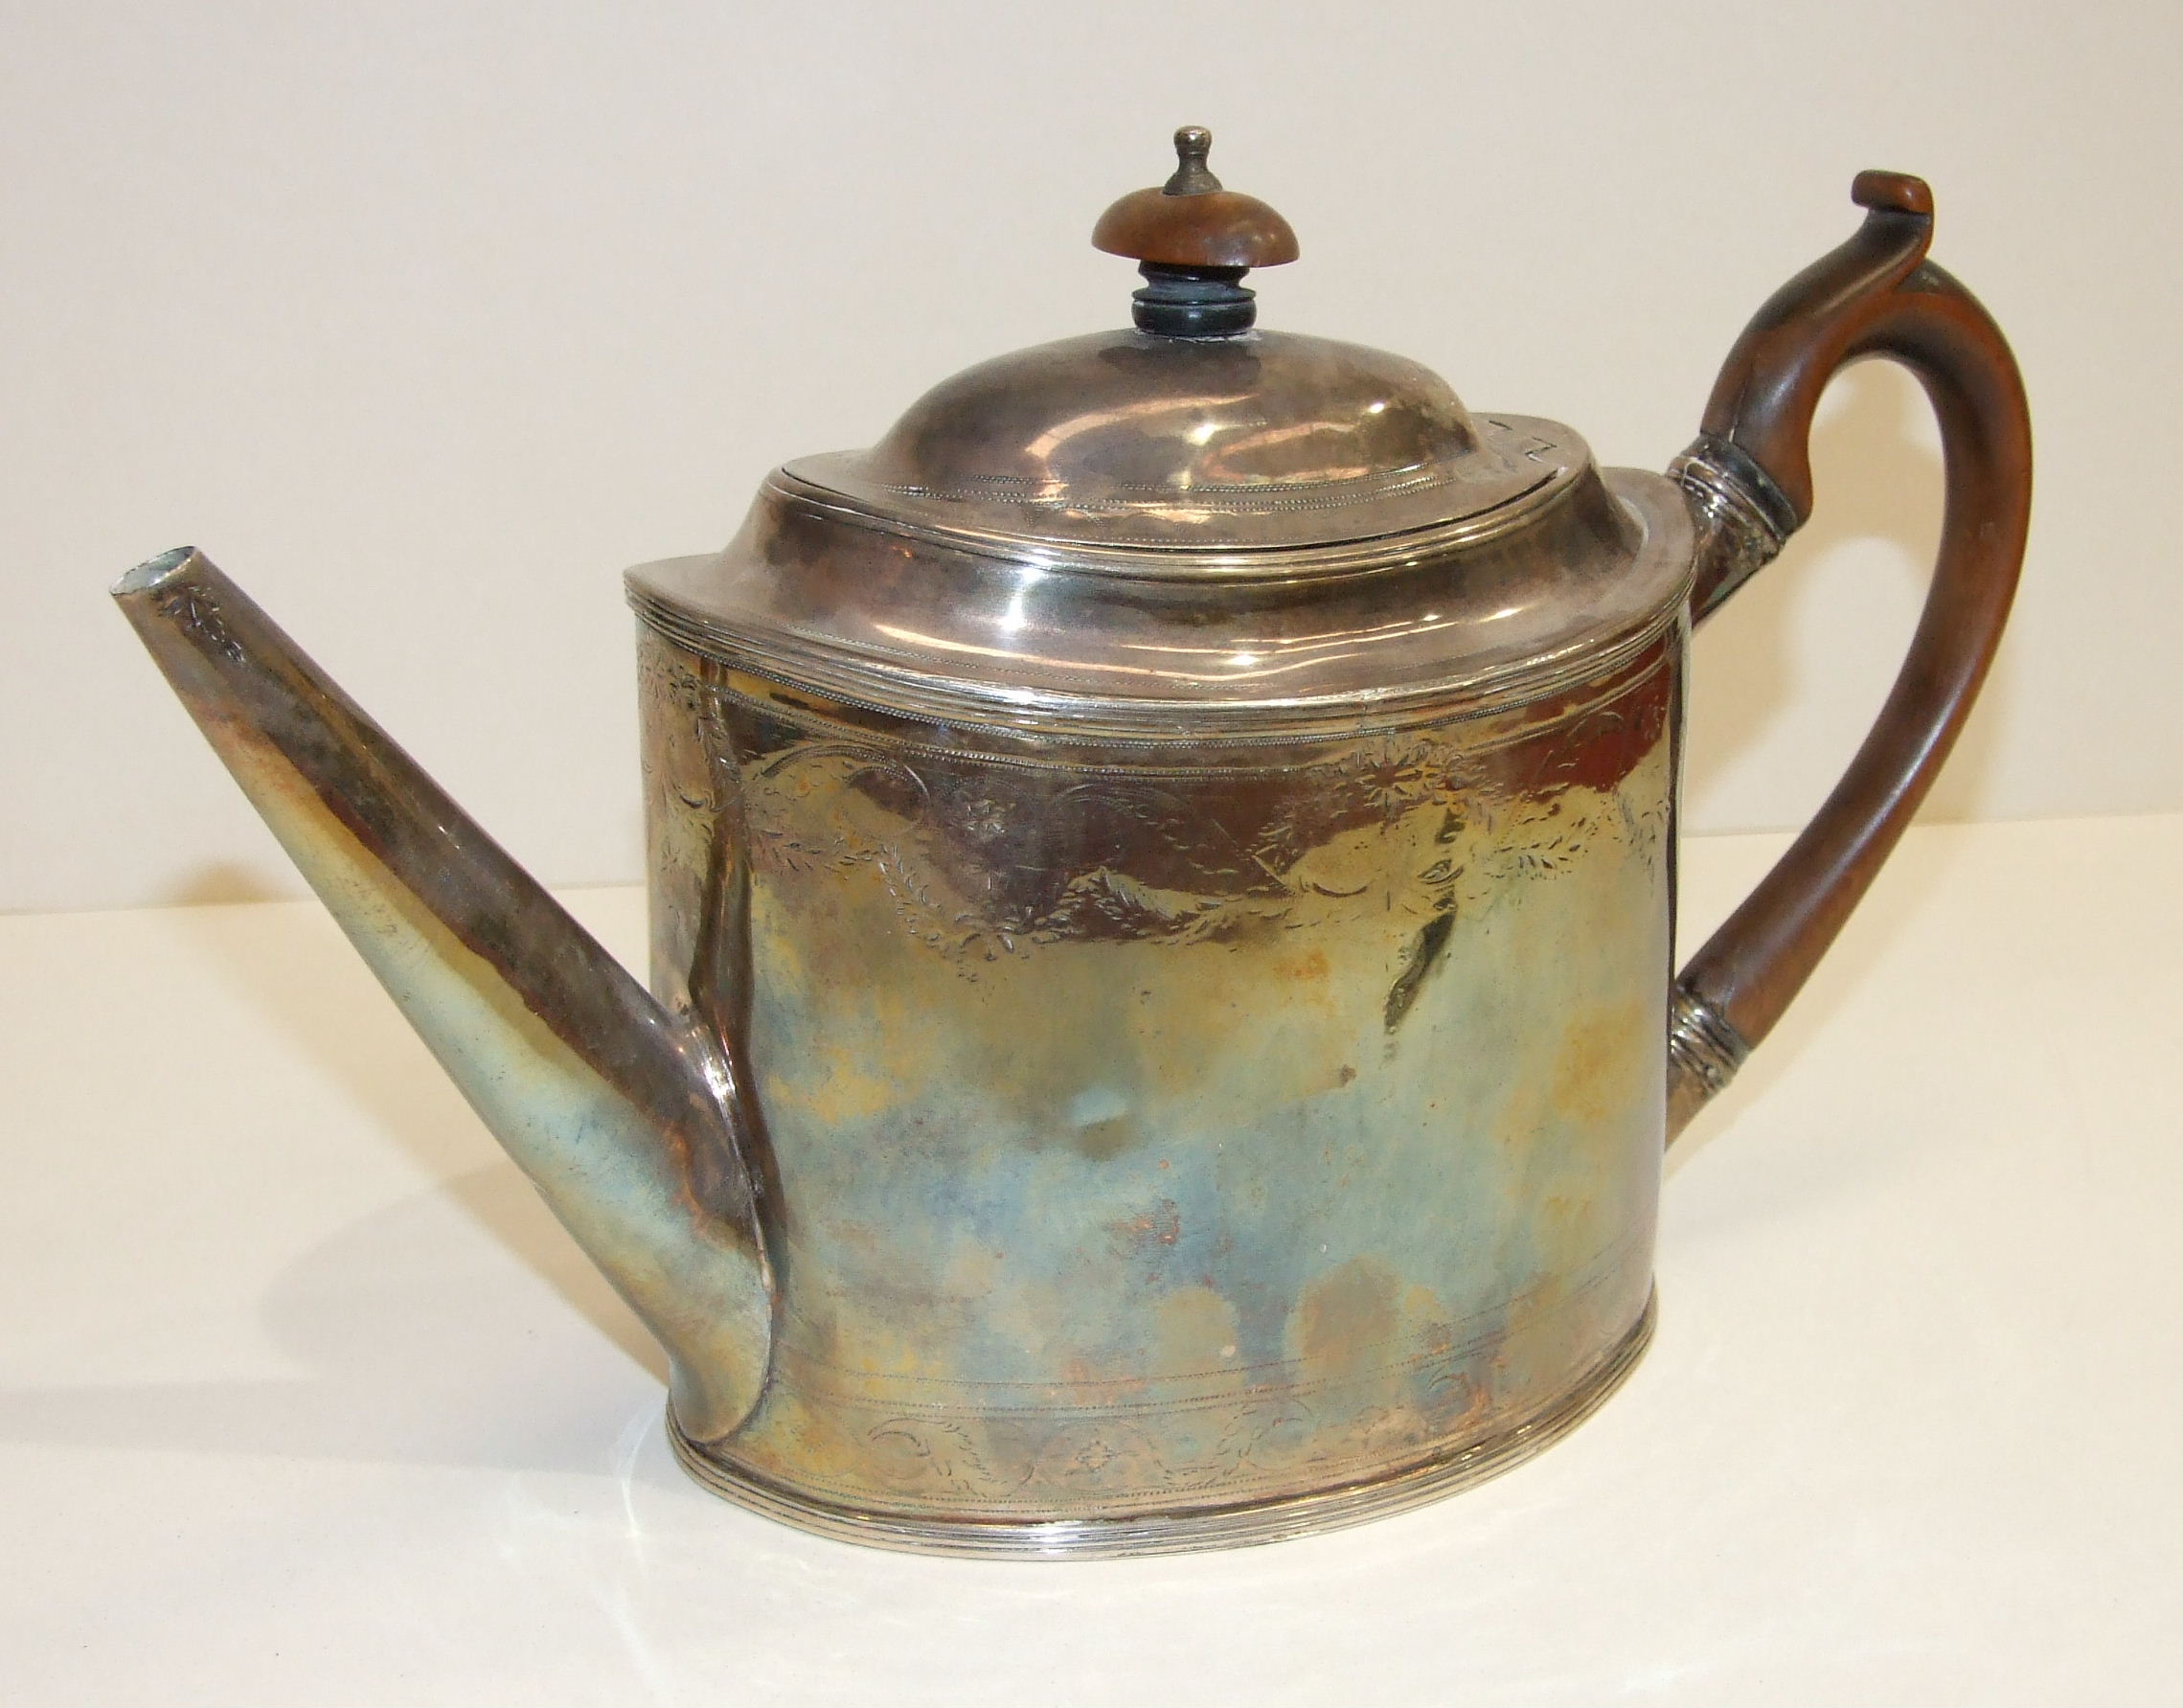 A George III oval teapot by Peter & Ann Bateman, of plain, slightly-tapered form, with wood finial